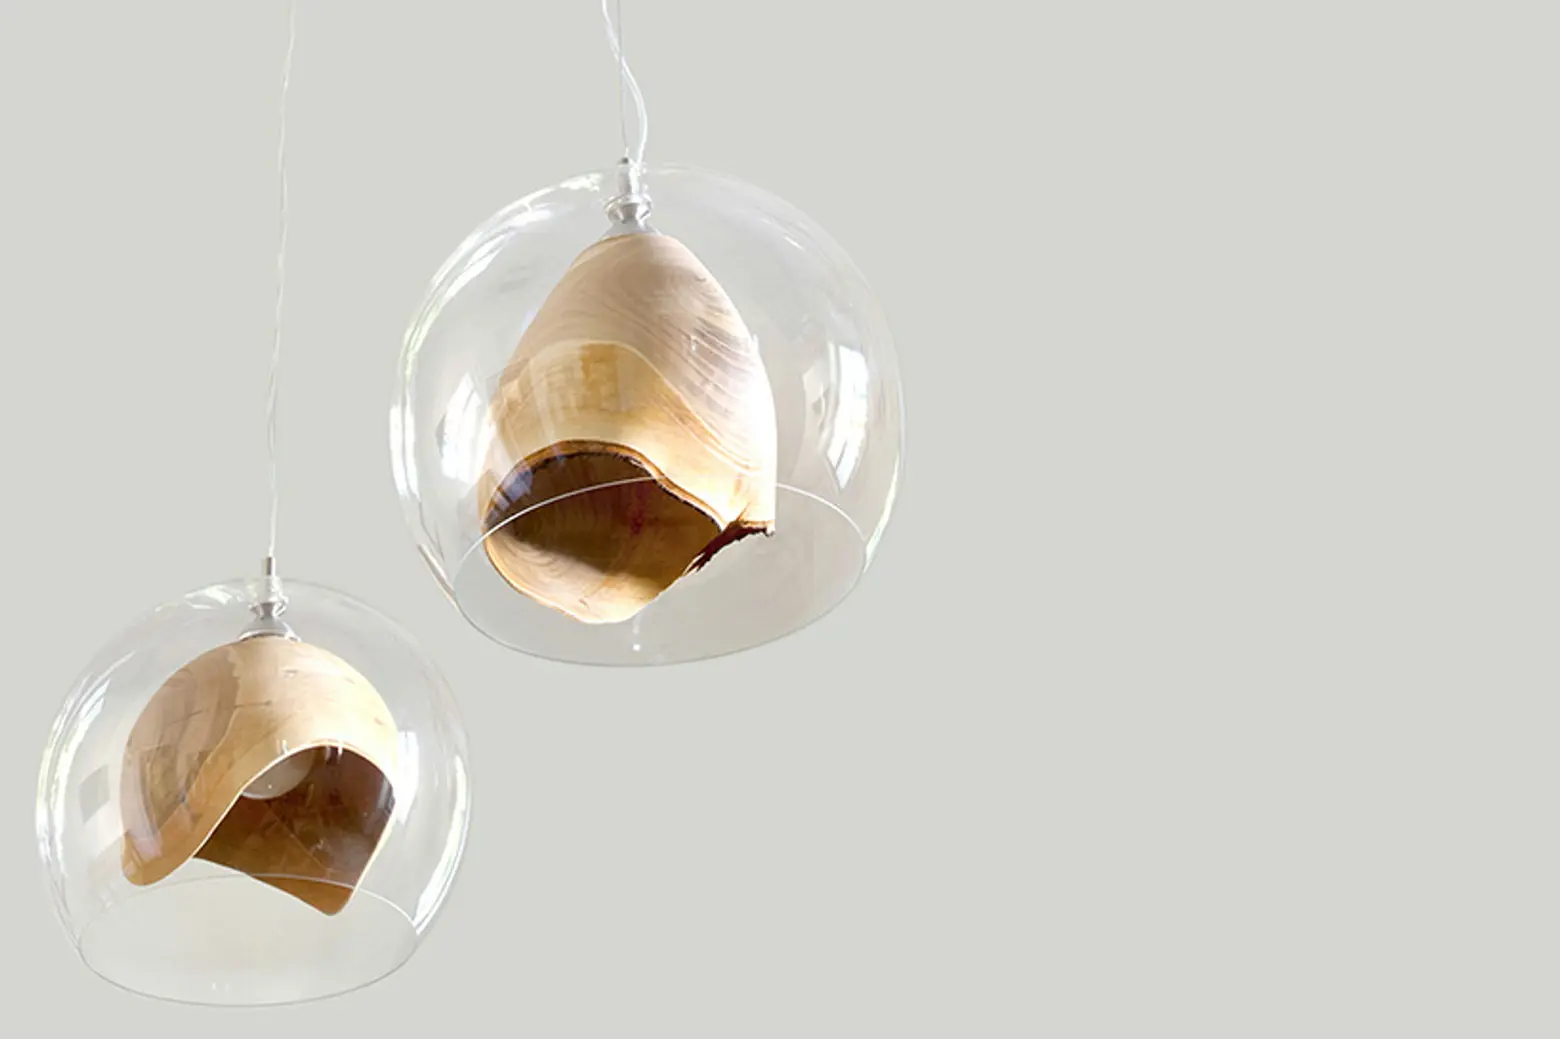 Slow Wood’s Teca Lamp Elegantly Combines Hand-Turned Wood and Blown Glass